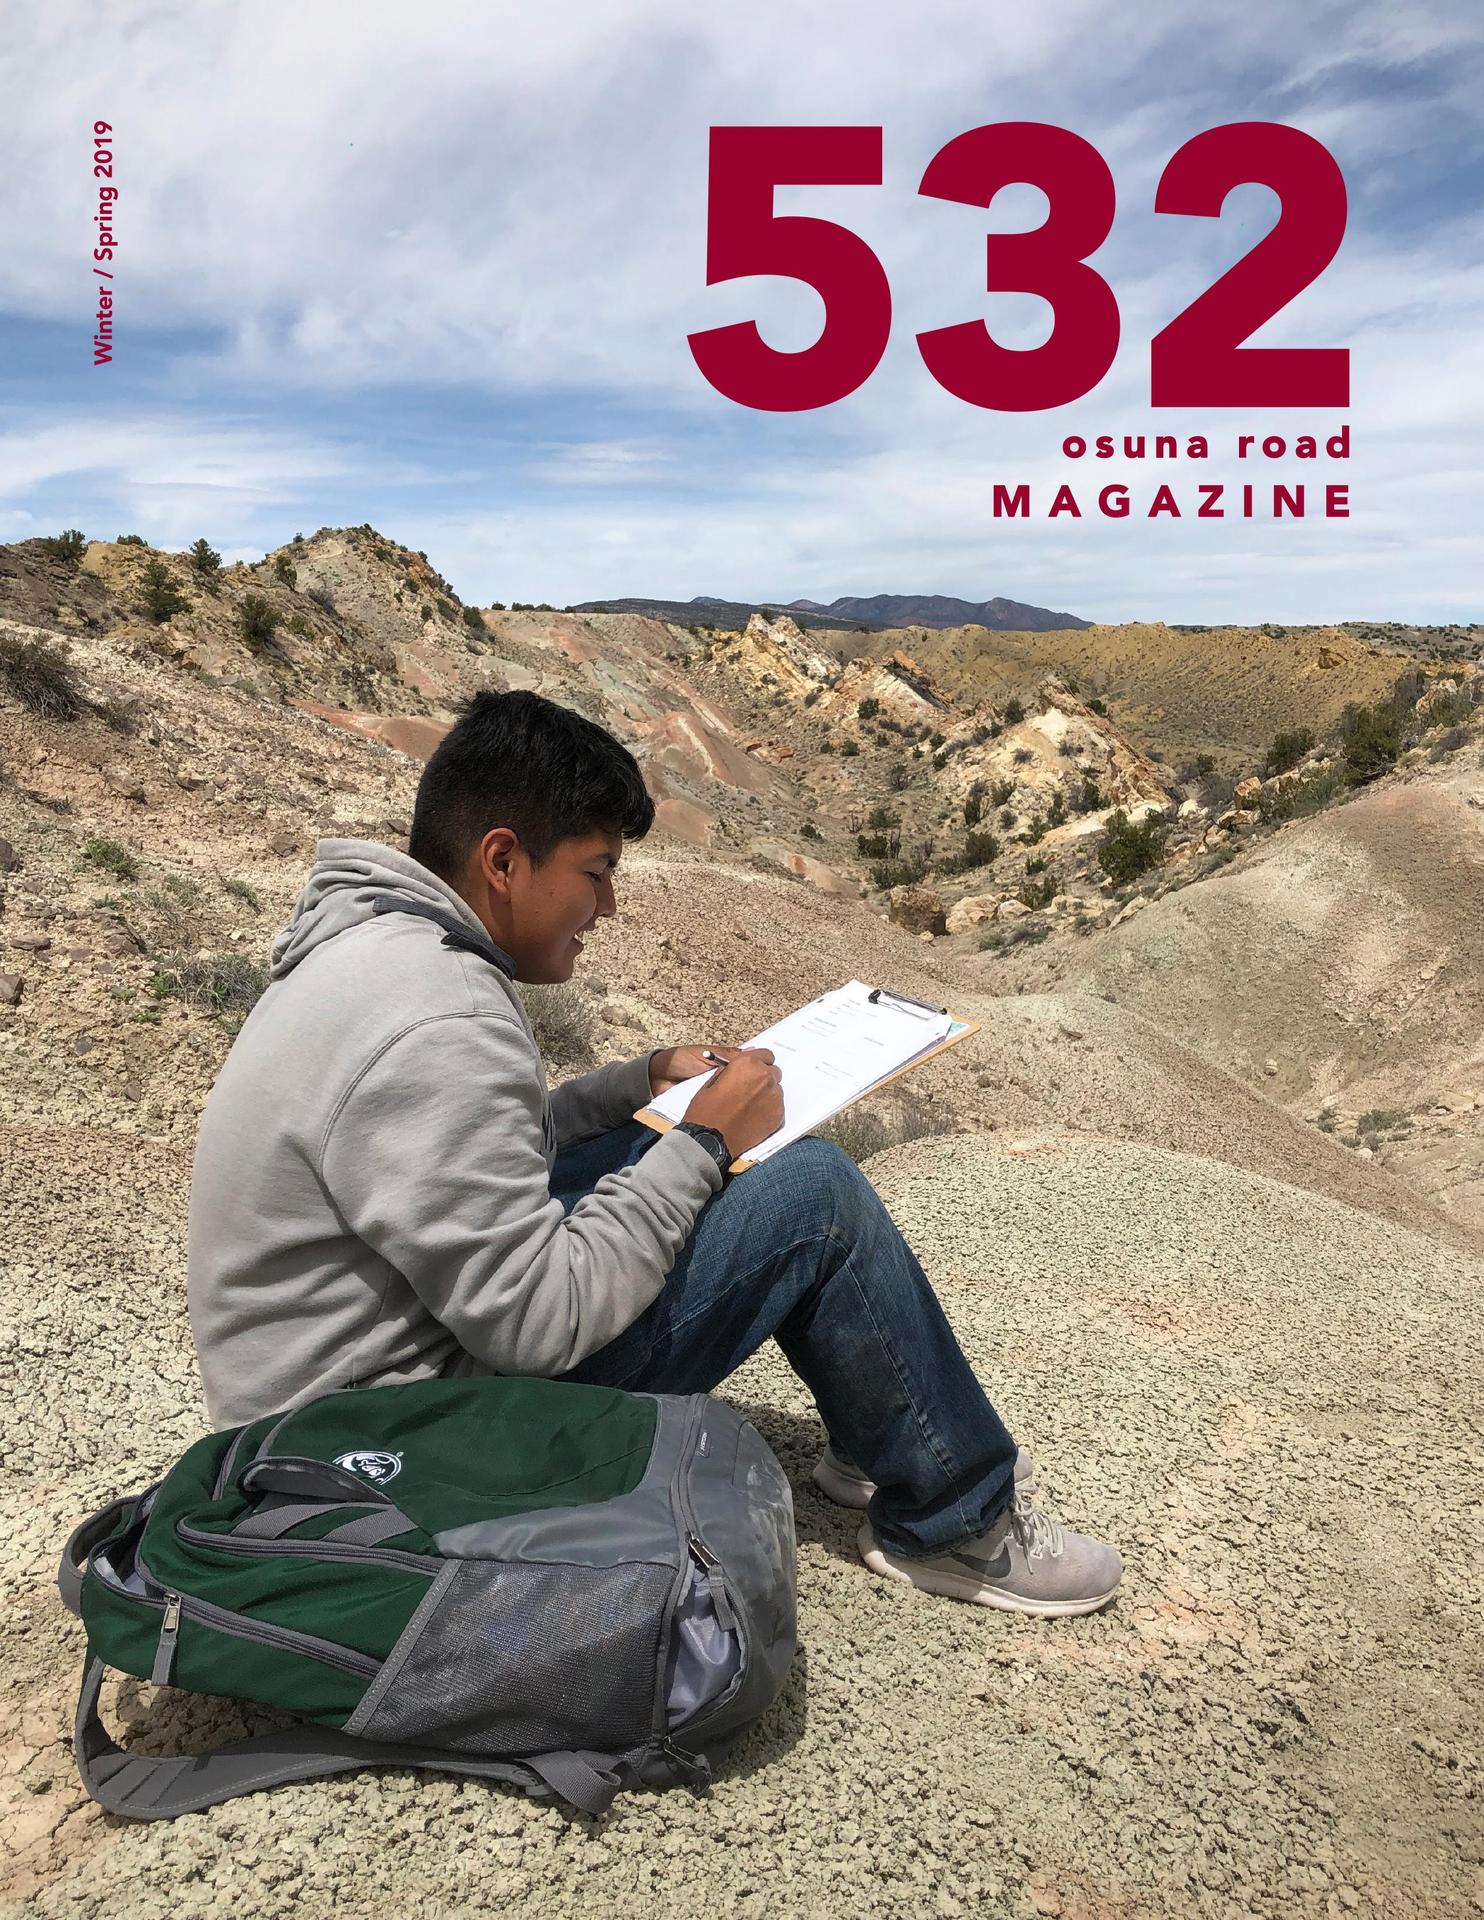 532 magazine cover of student drawing in nature